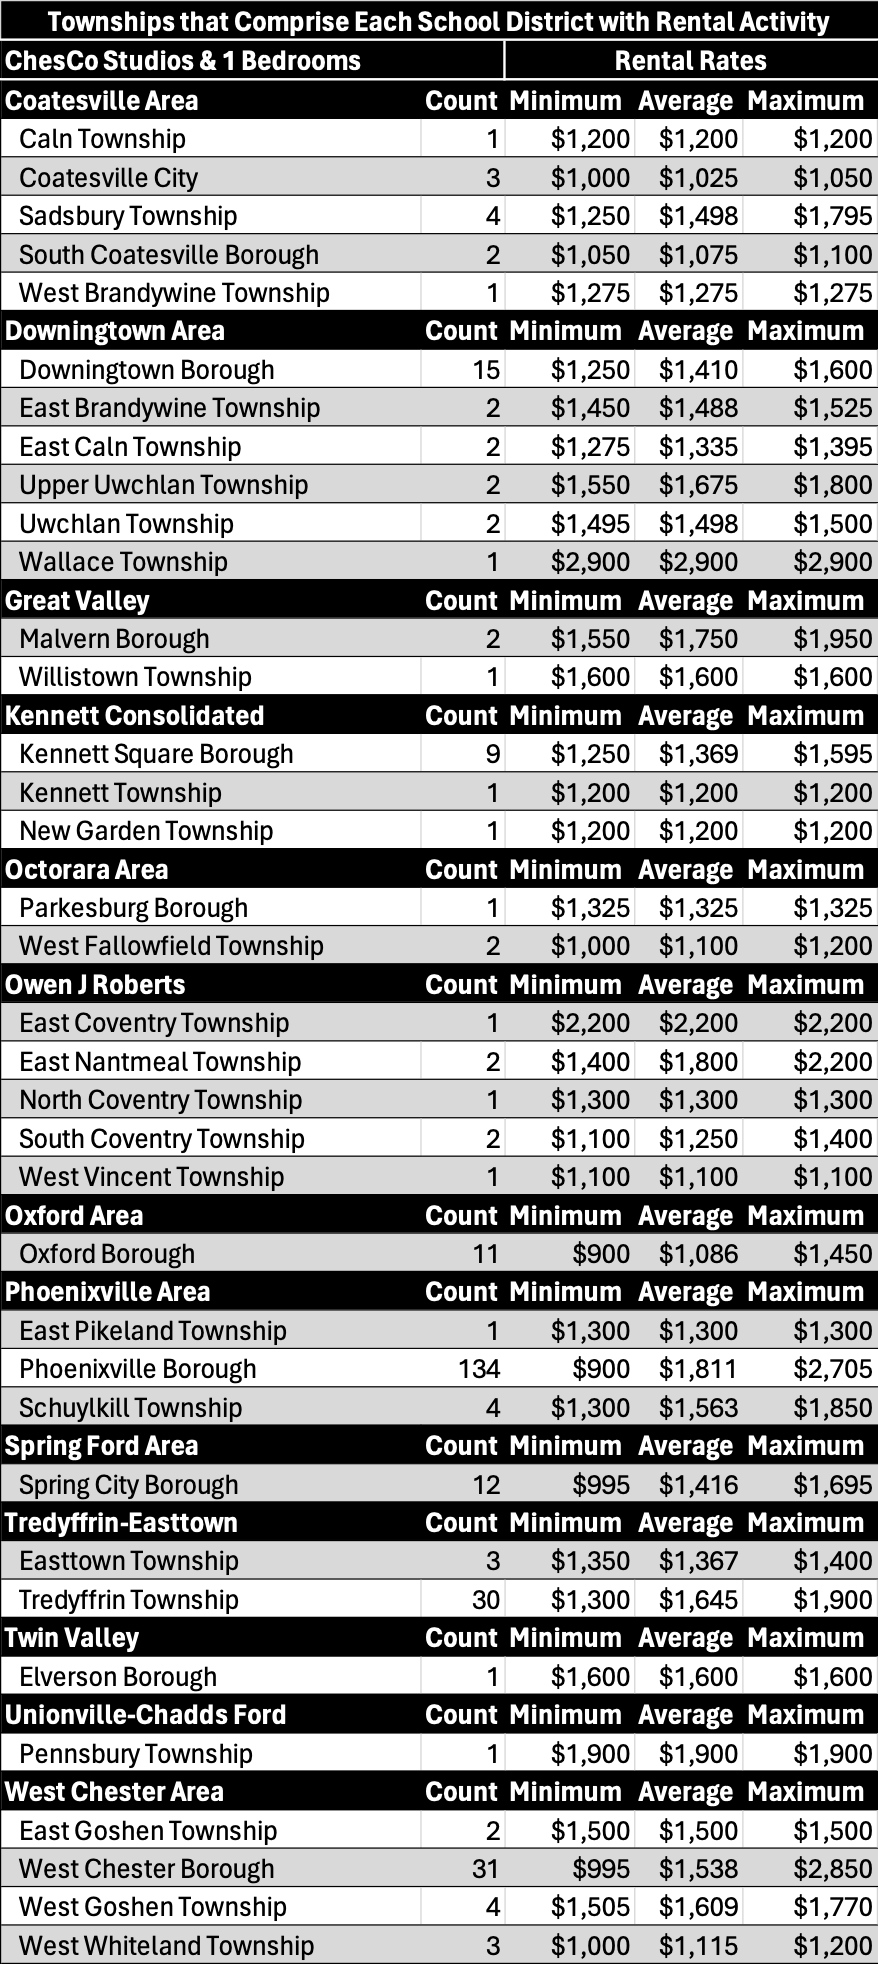 A table of each township within each School District in Chester County, PA for studios and 1 bedrooms, which includes the number of transactions and each township's corresponding rent prices displayed as minimum, average and maximum. 